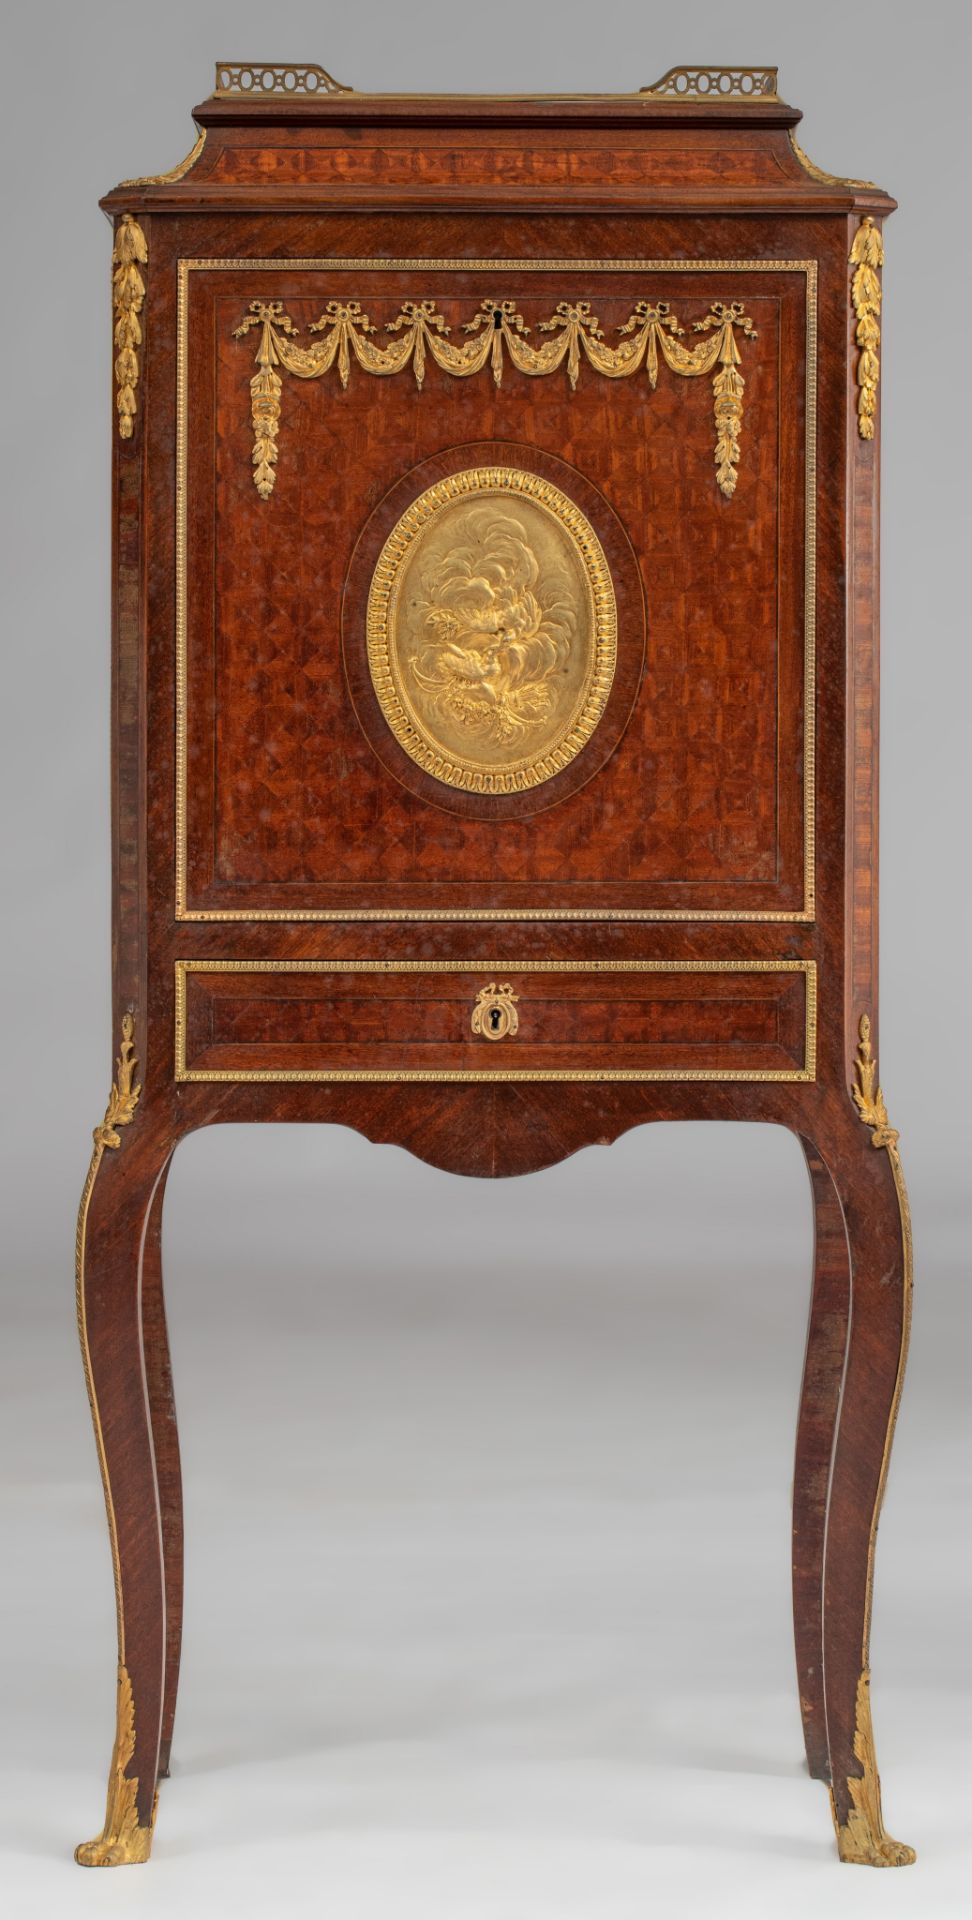 A Neoclassical Napoleon III fall front desk, decorated with parquetry and gilt bronze mounts, H 136 - Image 3 of 7